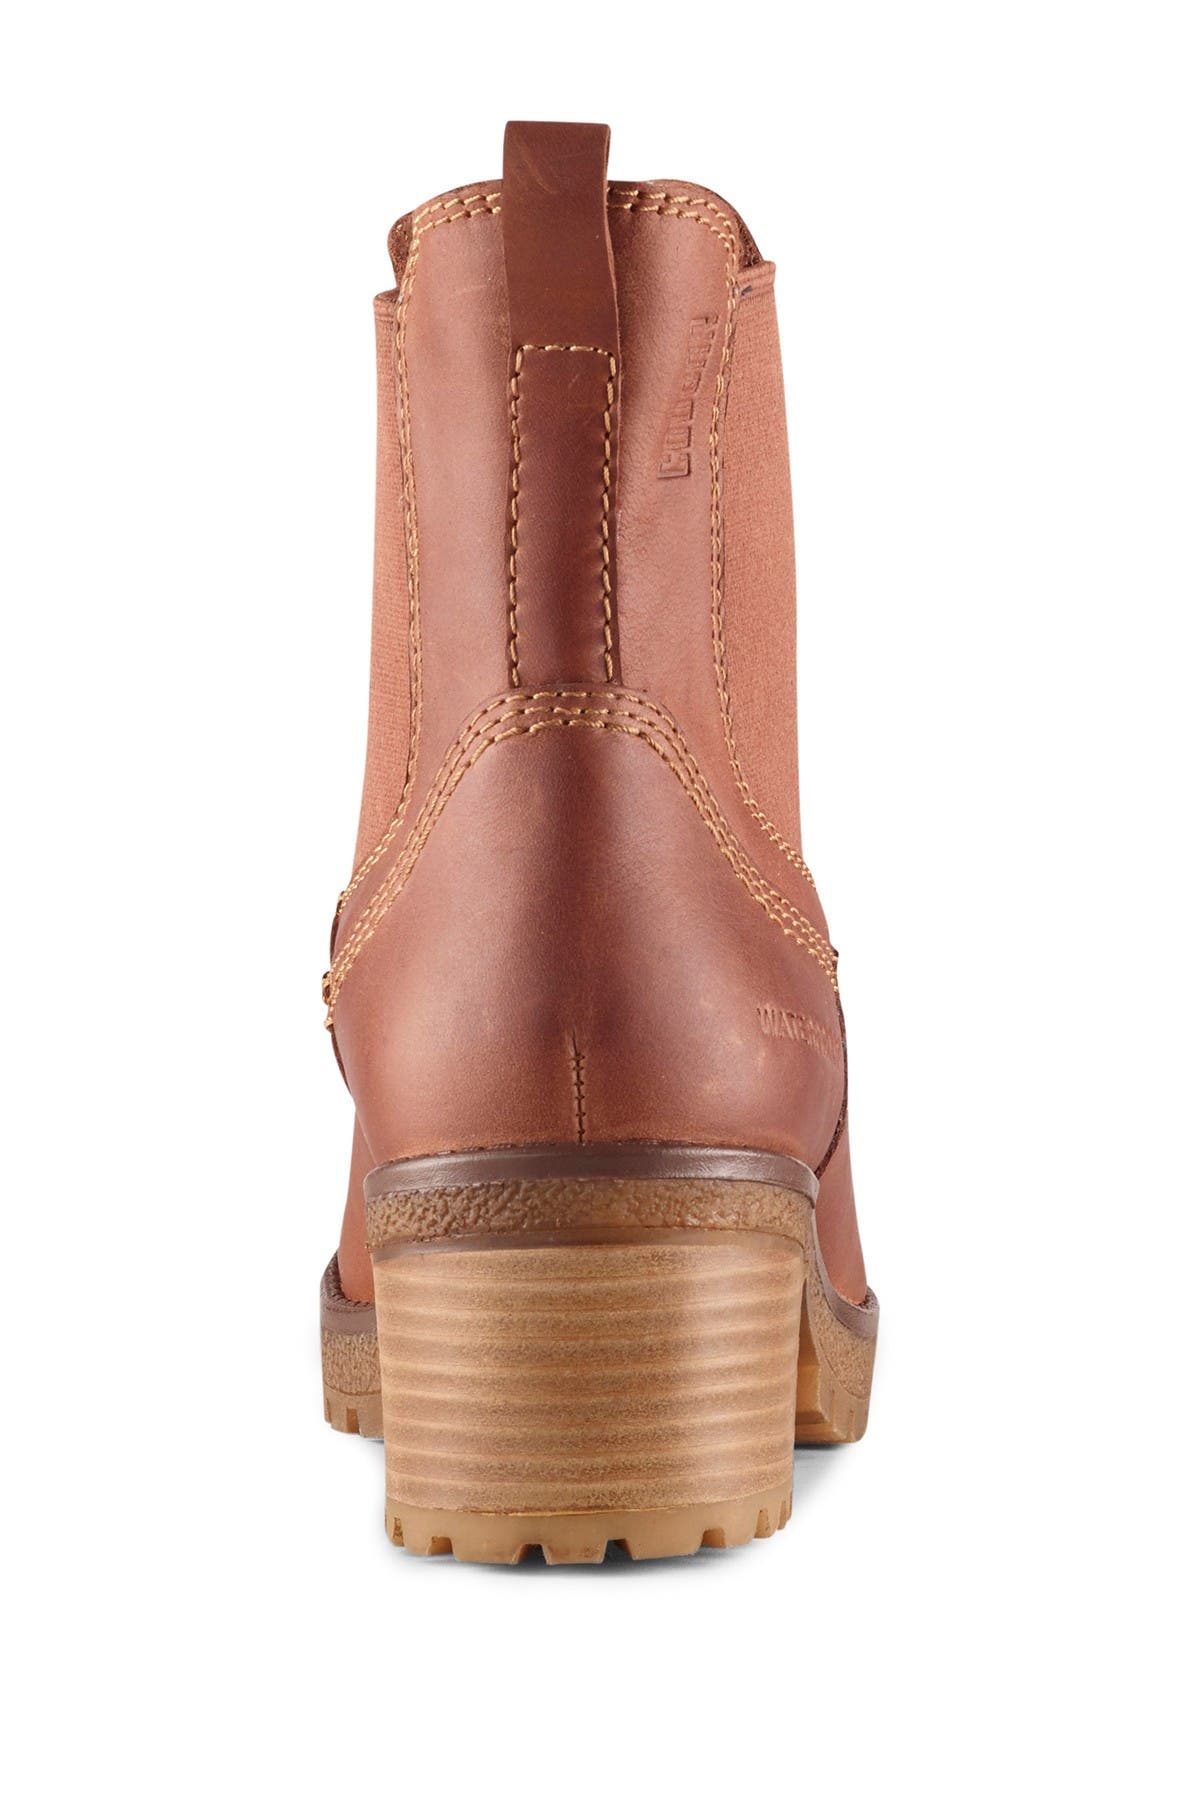 cougar dallas waterproof leather boot